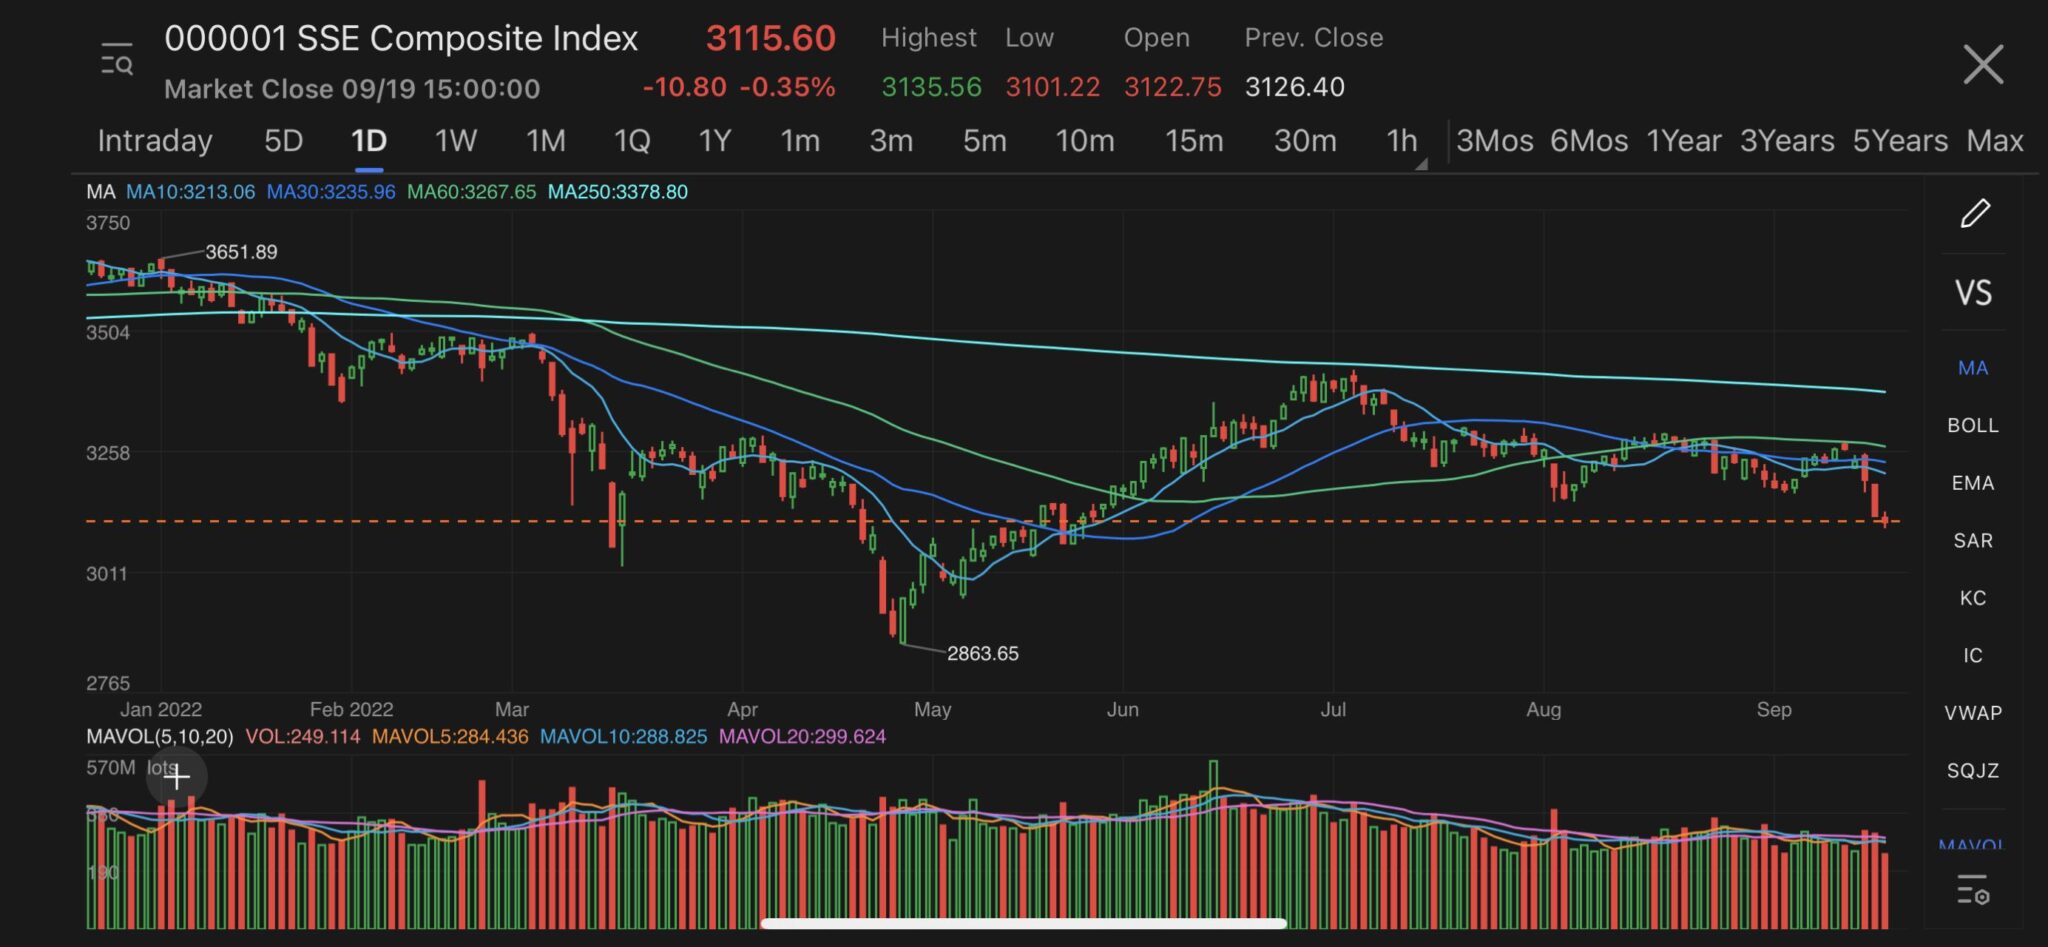 Shanghai Composite closed down for fourth straight day